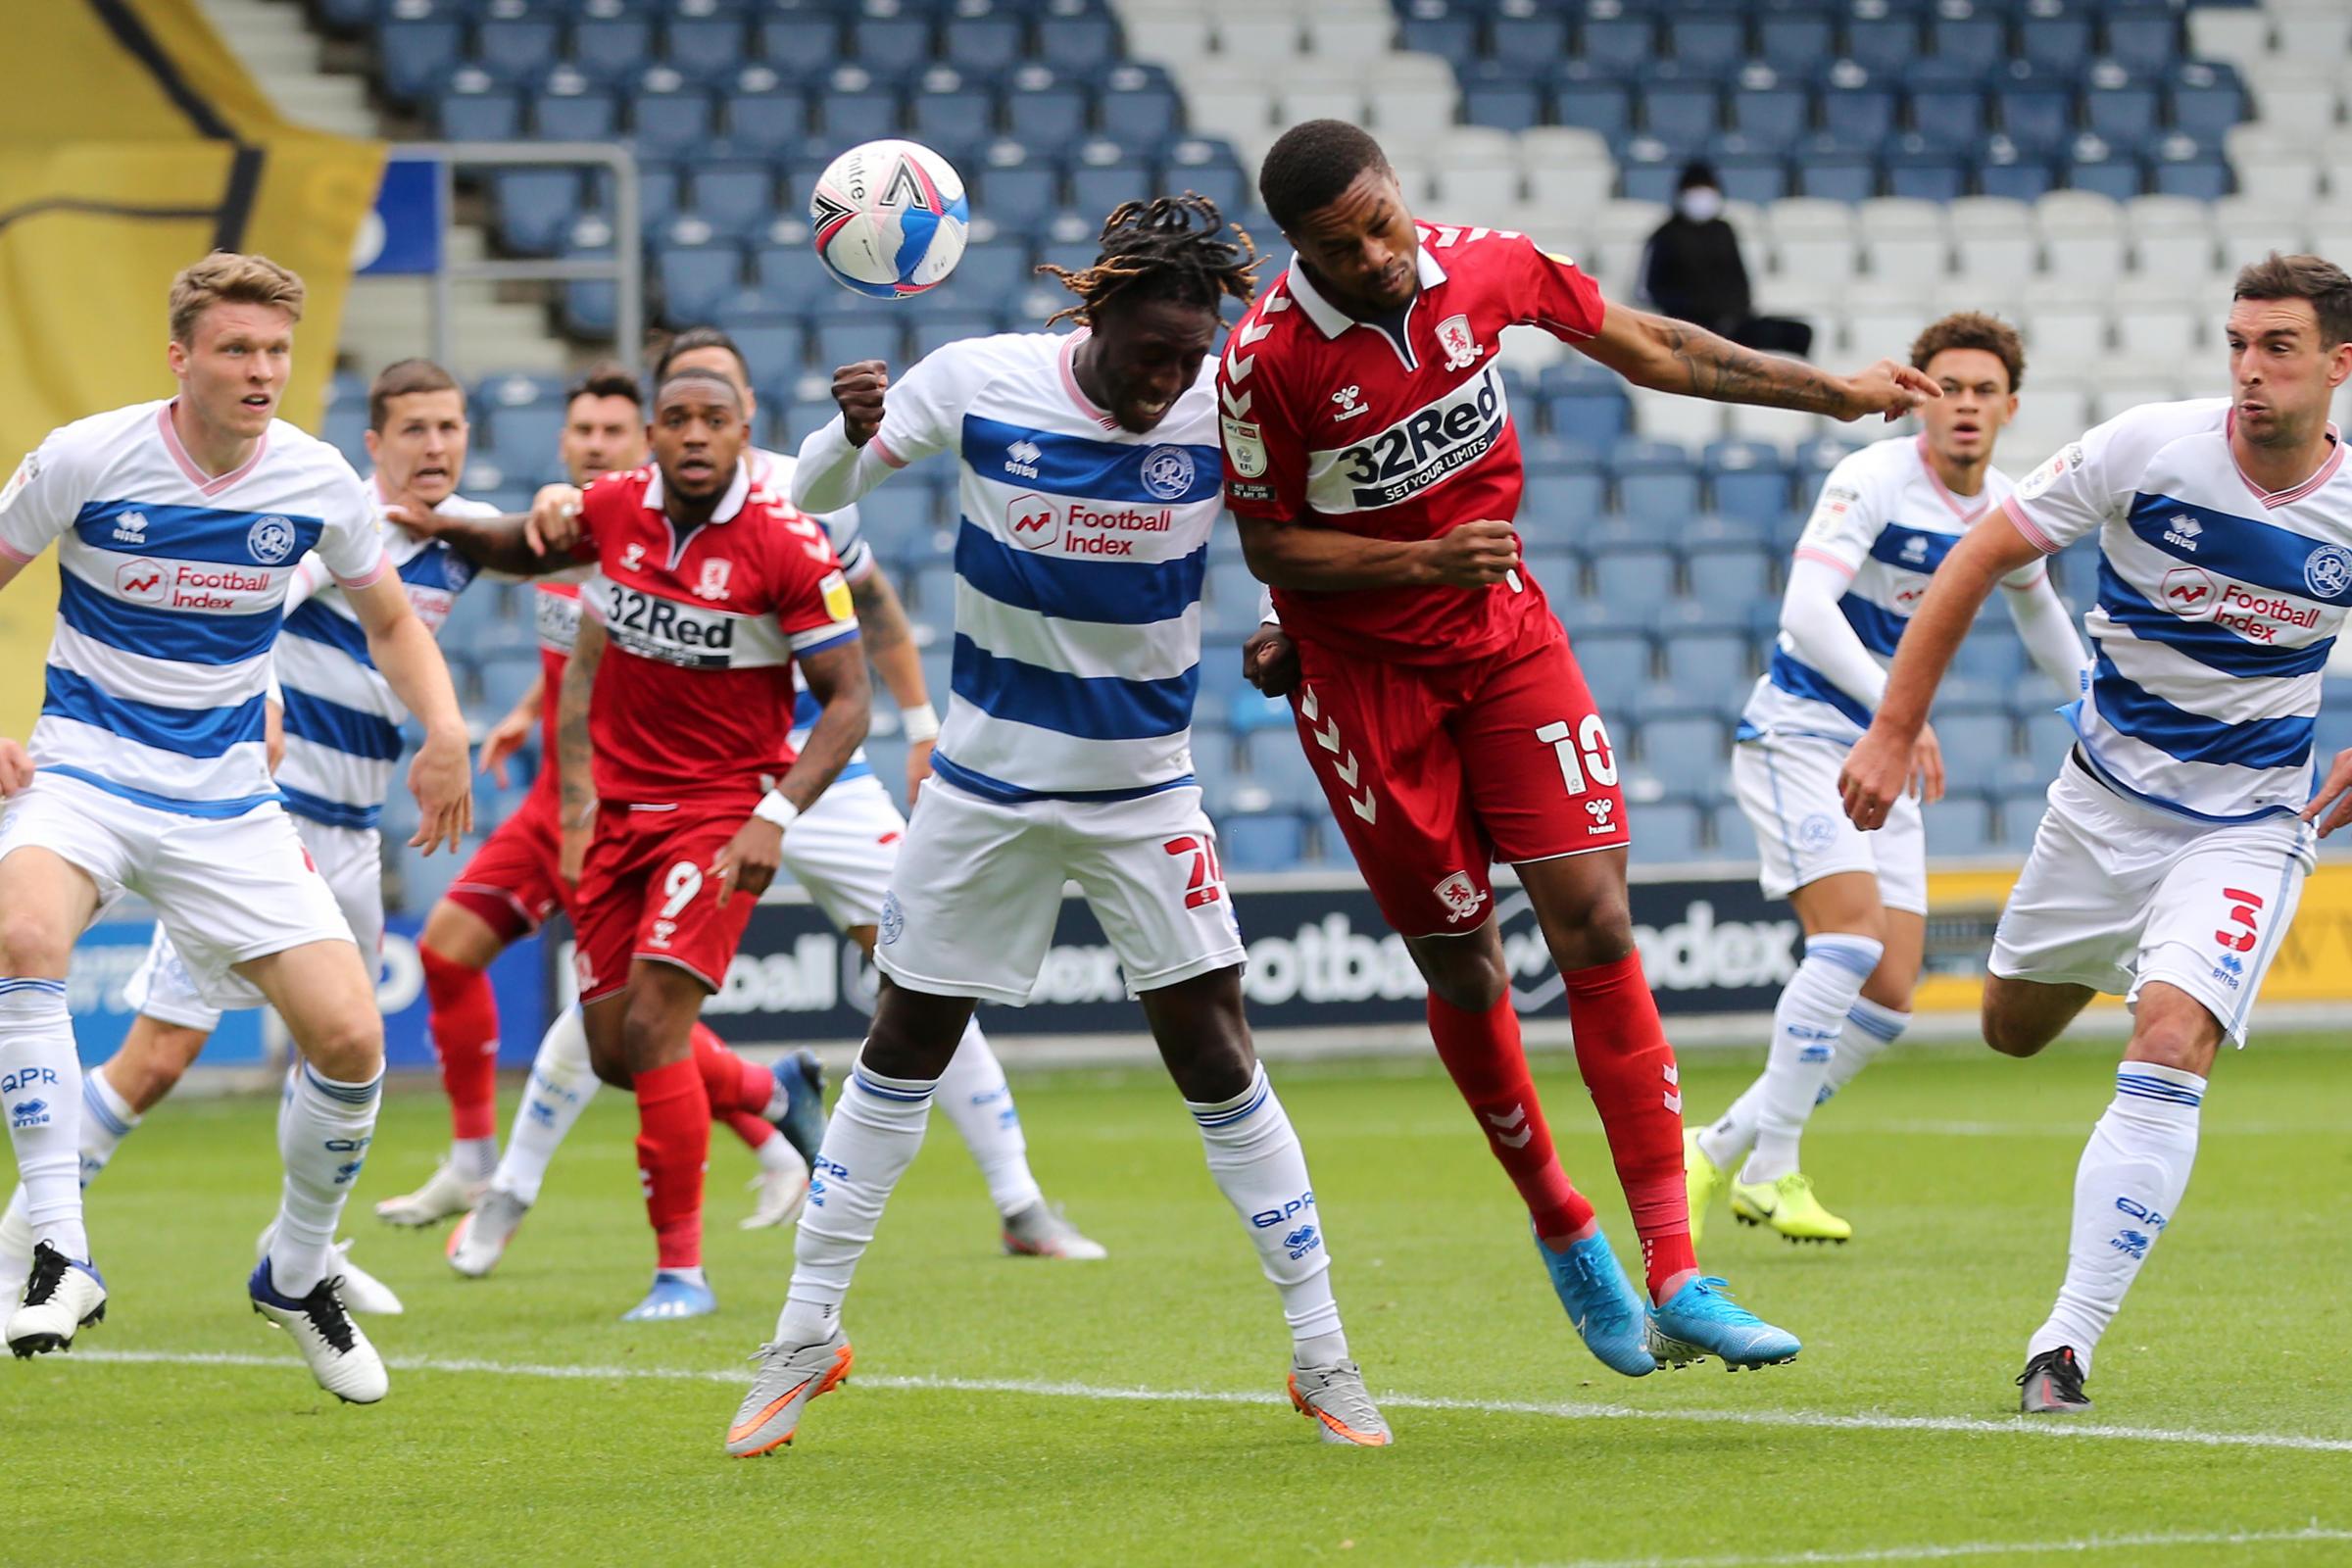 FULL-TIME: QPR 1 Middlesbrough 1